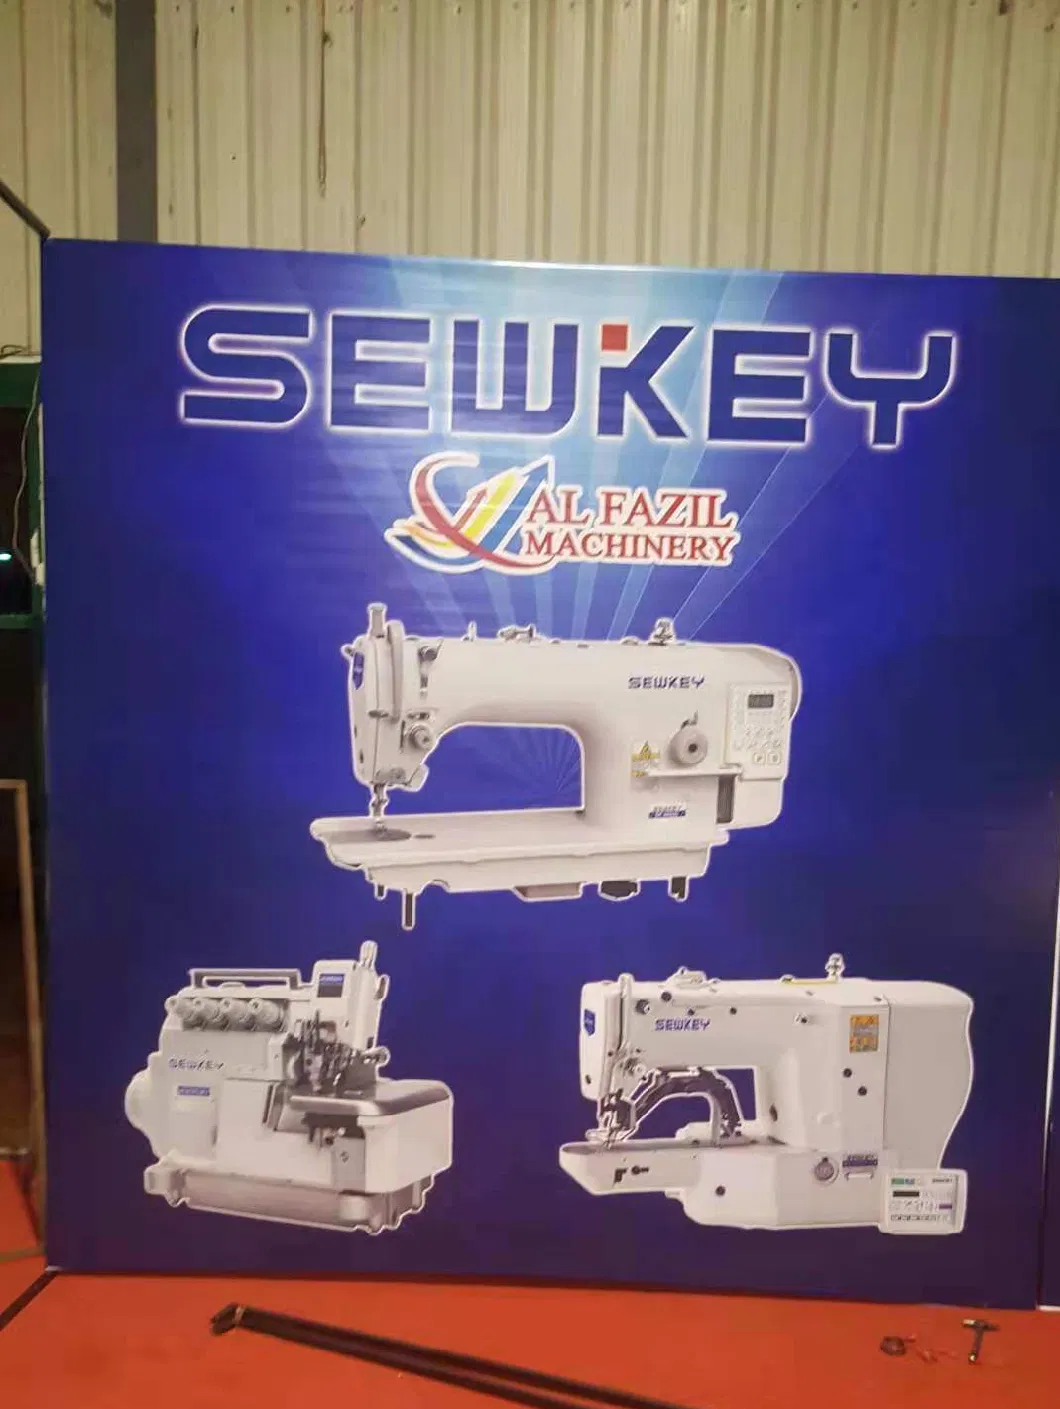 Sk-Pk-Sp Industrial Machine for Flat Bed Coverstitch Device